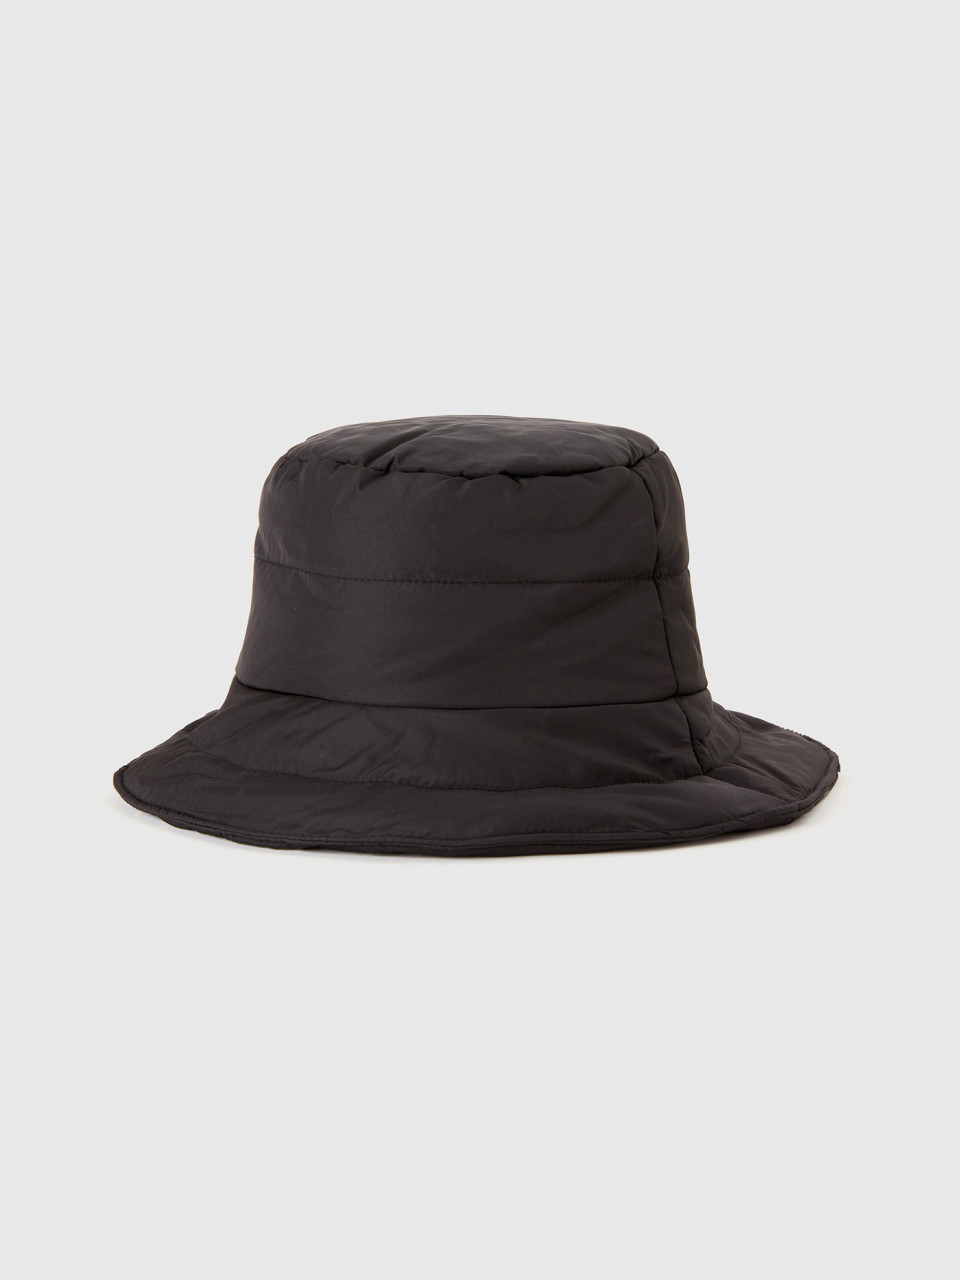 Benetton, Quilted Padded Hat, Black, Women